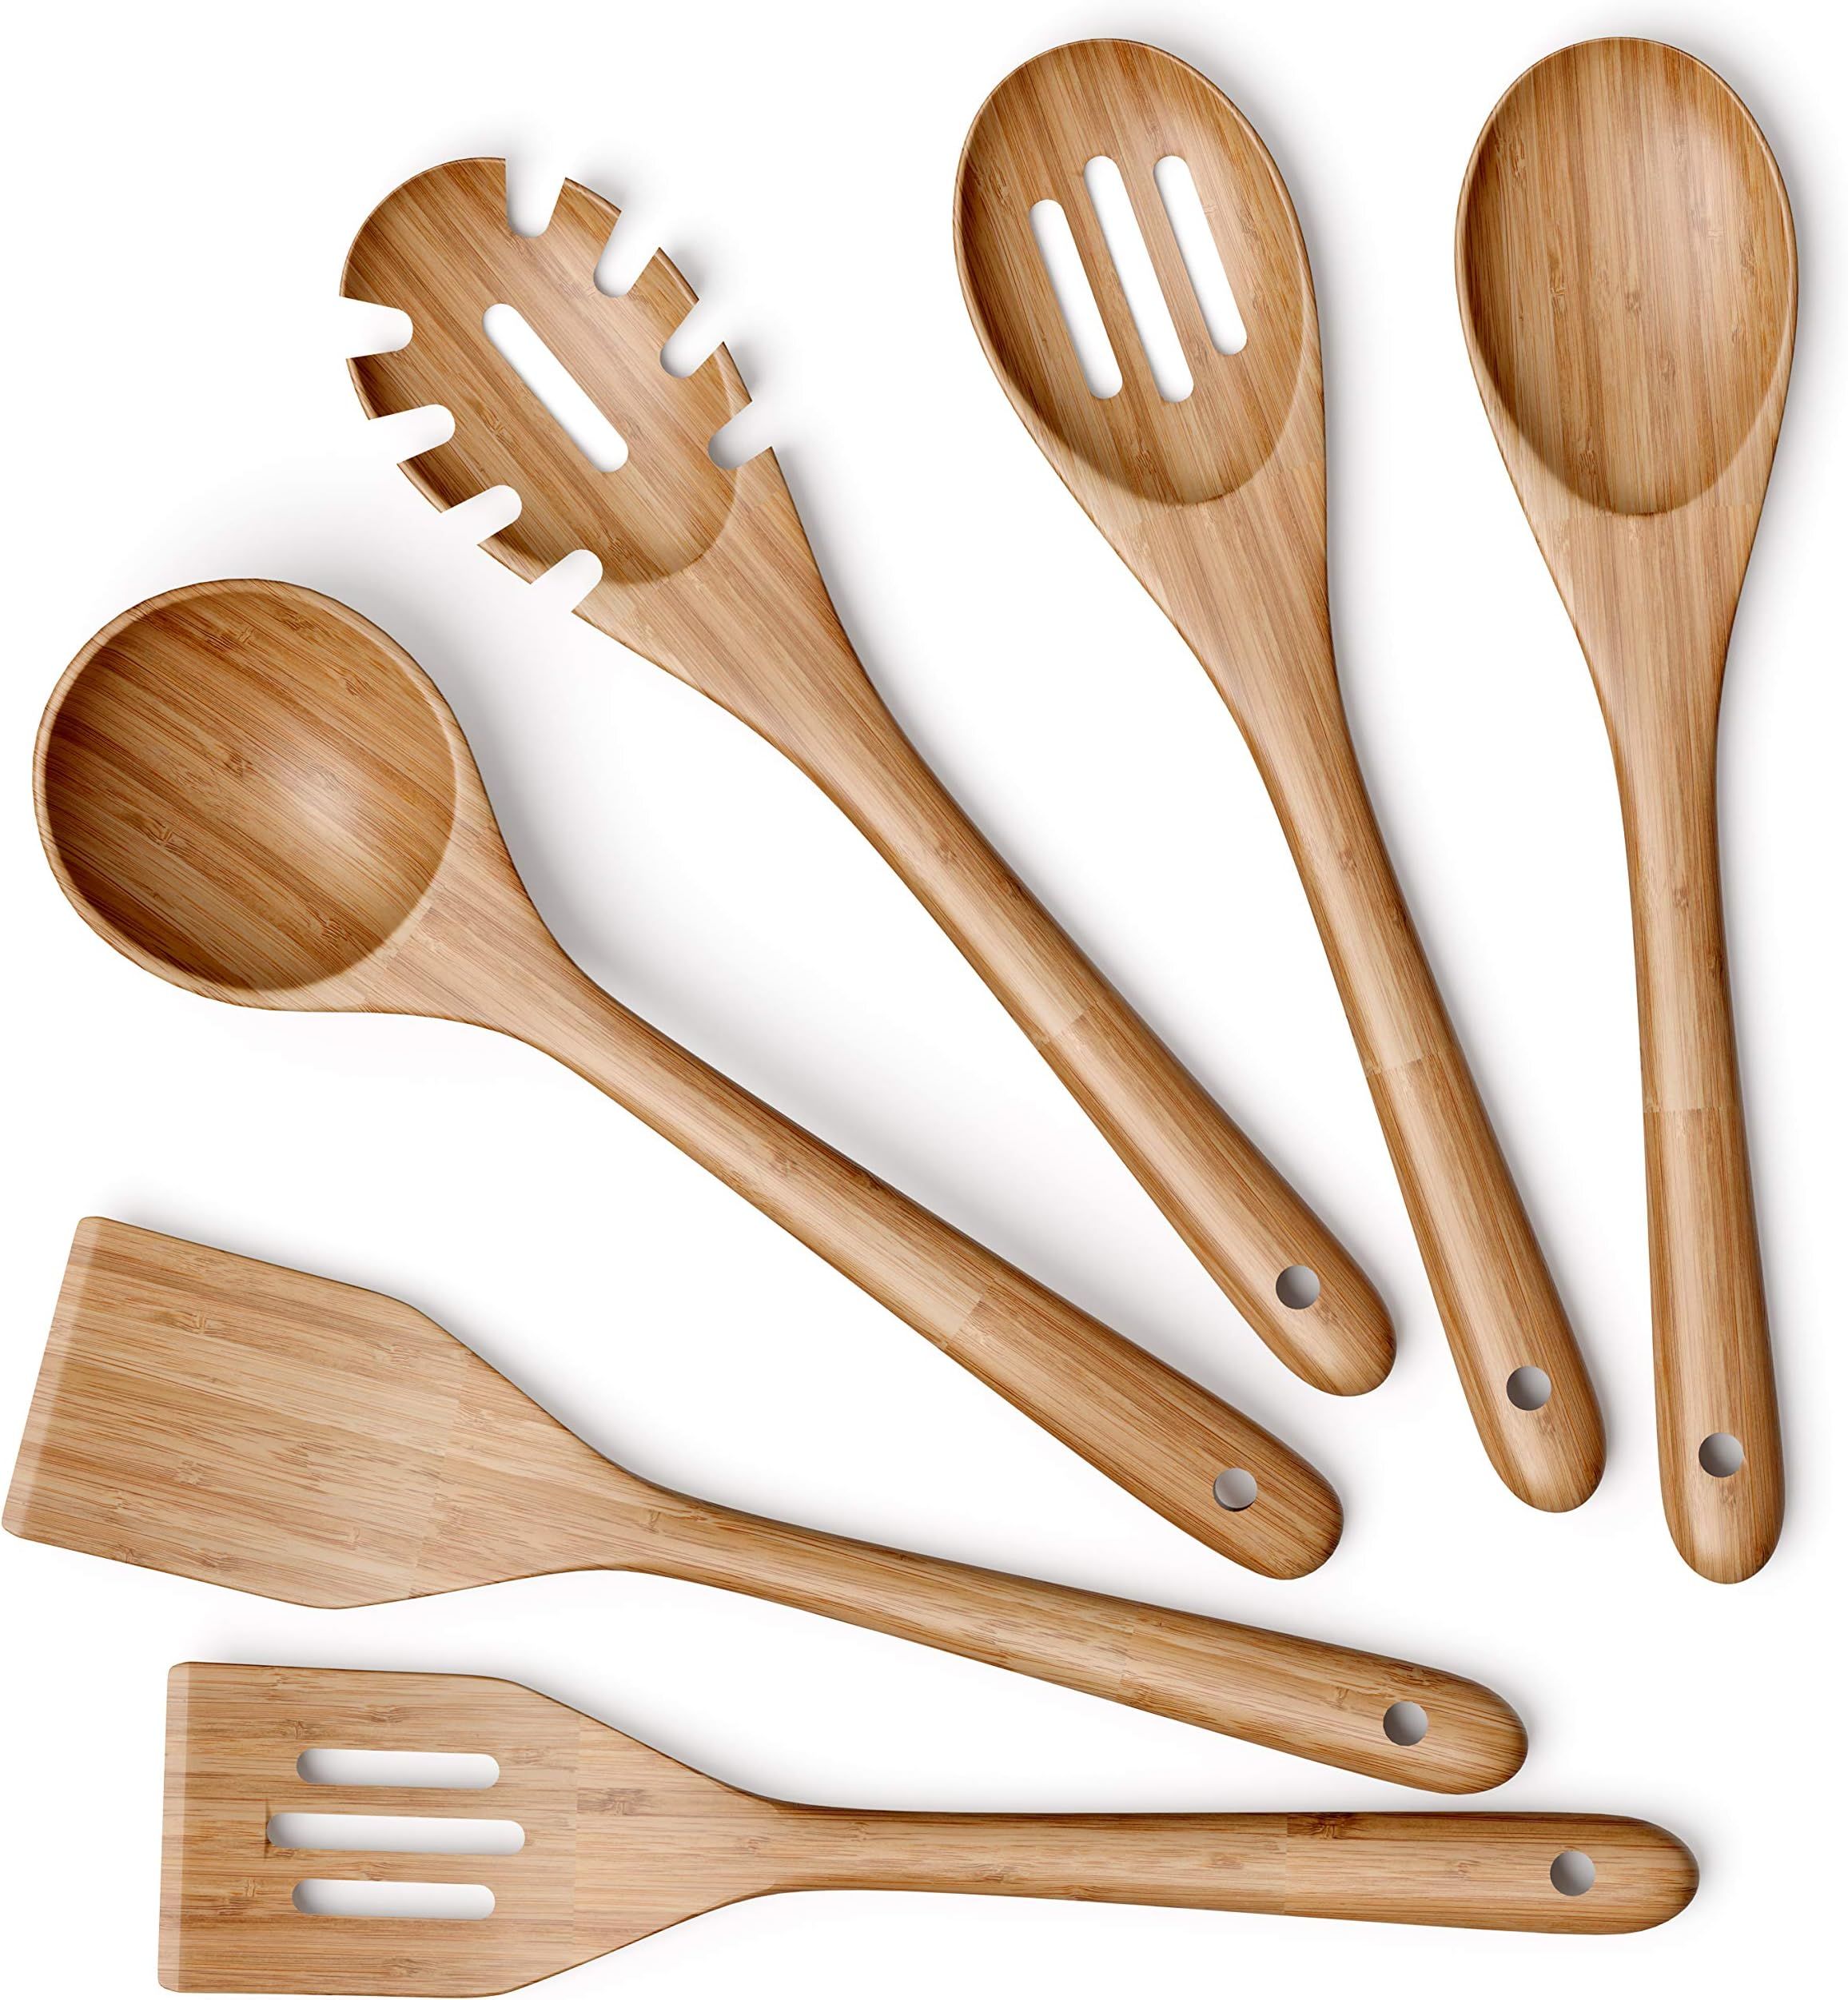 Wooden Kitchen Utensils Set - 6 Piece Non-Stick Bamboo Wooden Utensils for Cooking - Easy to Clean R | Amazon (US)